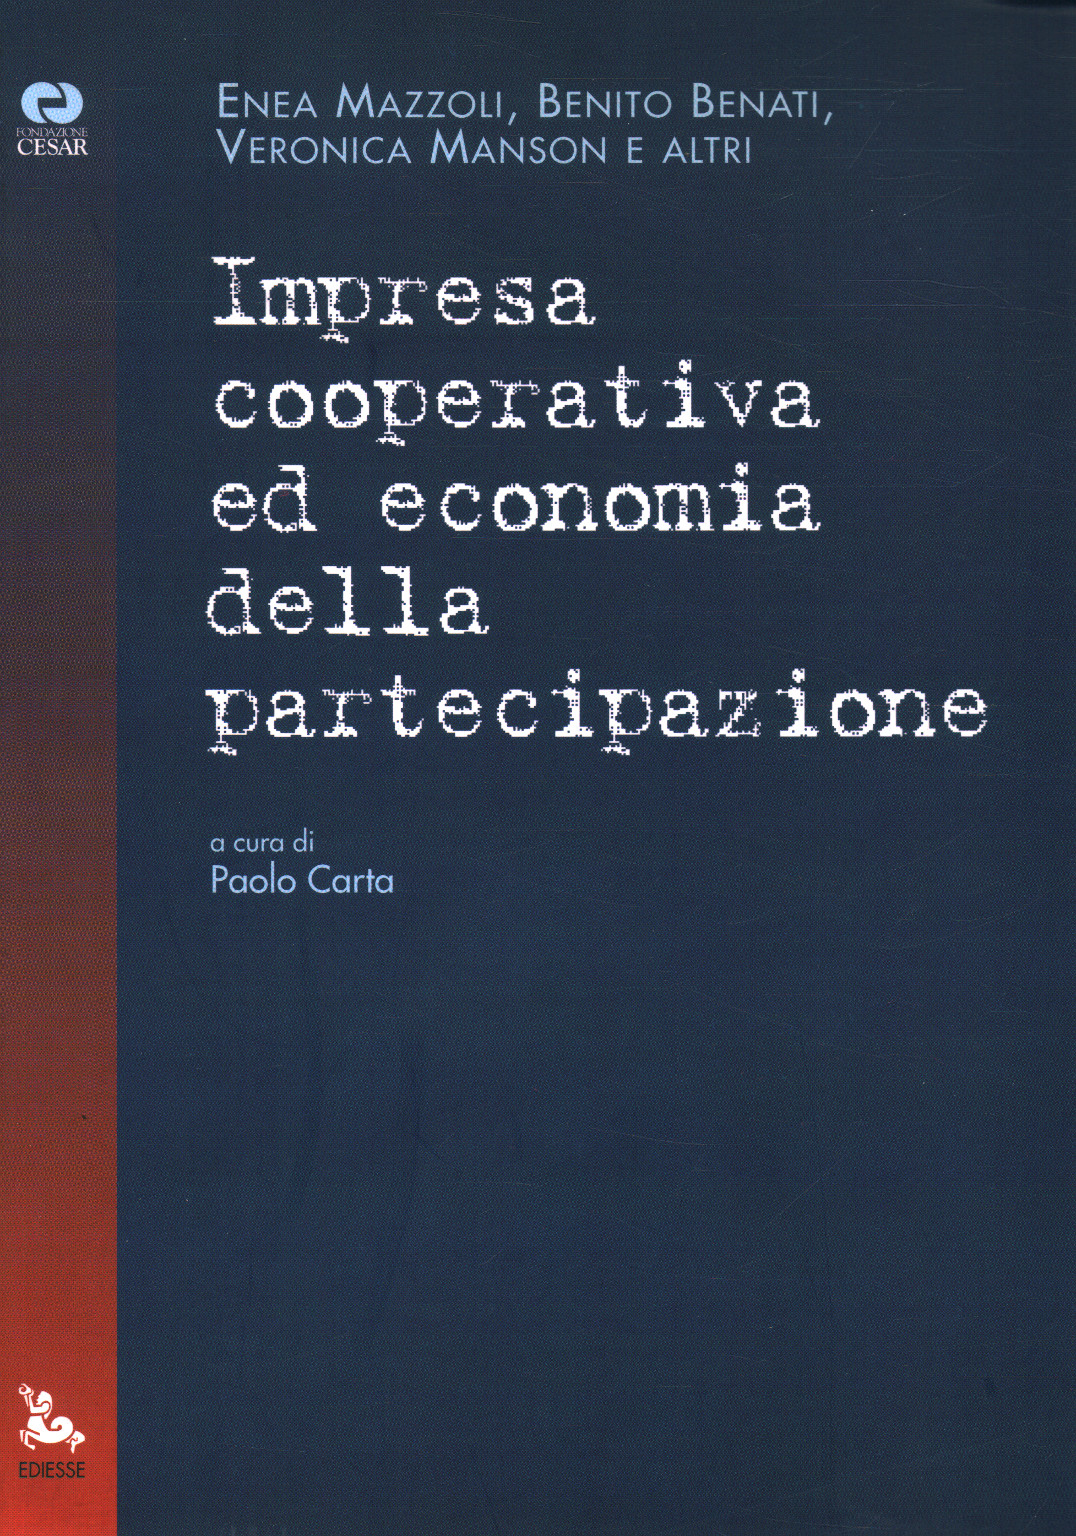 Cooperative enterprise and the economy of participation, s.a.